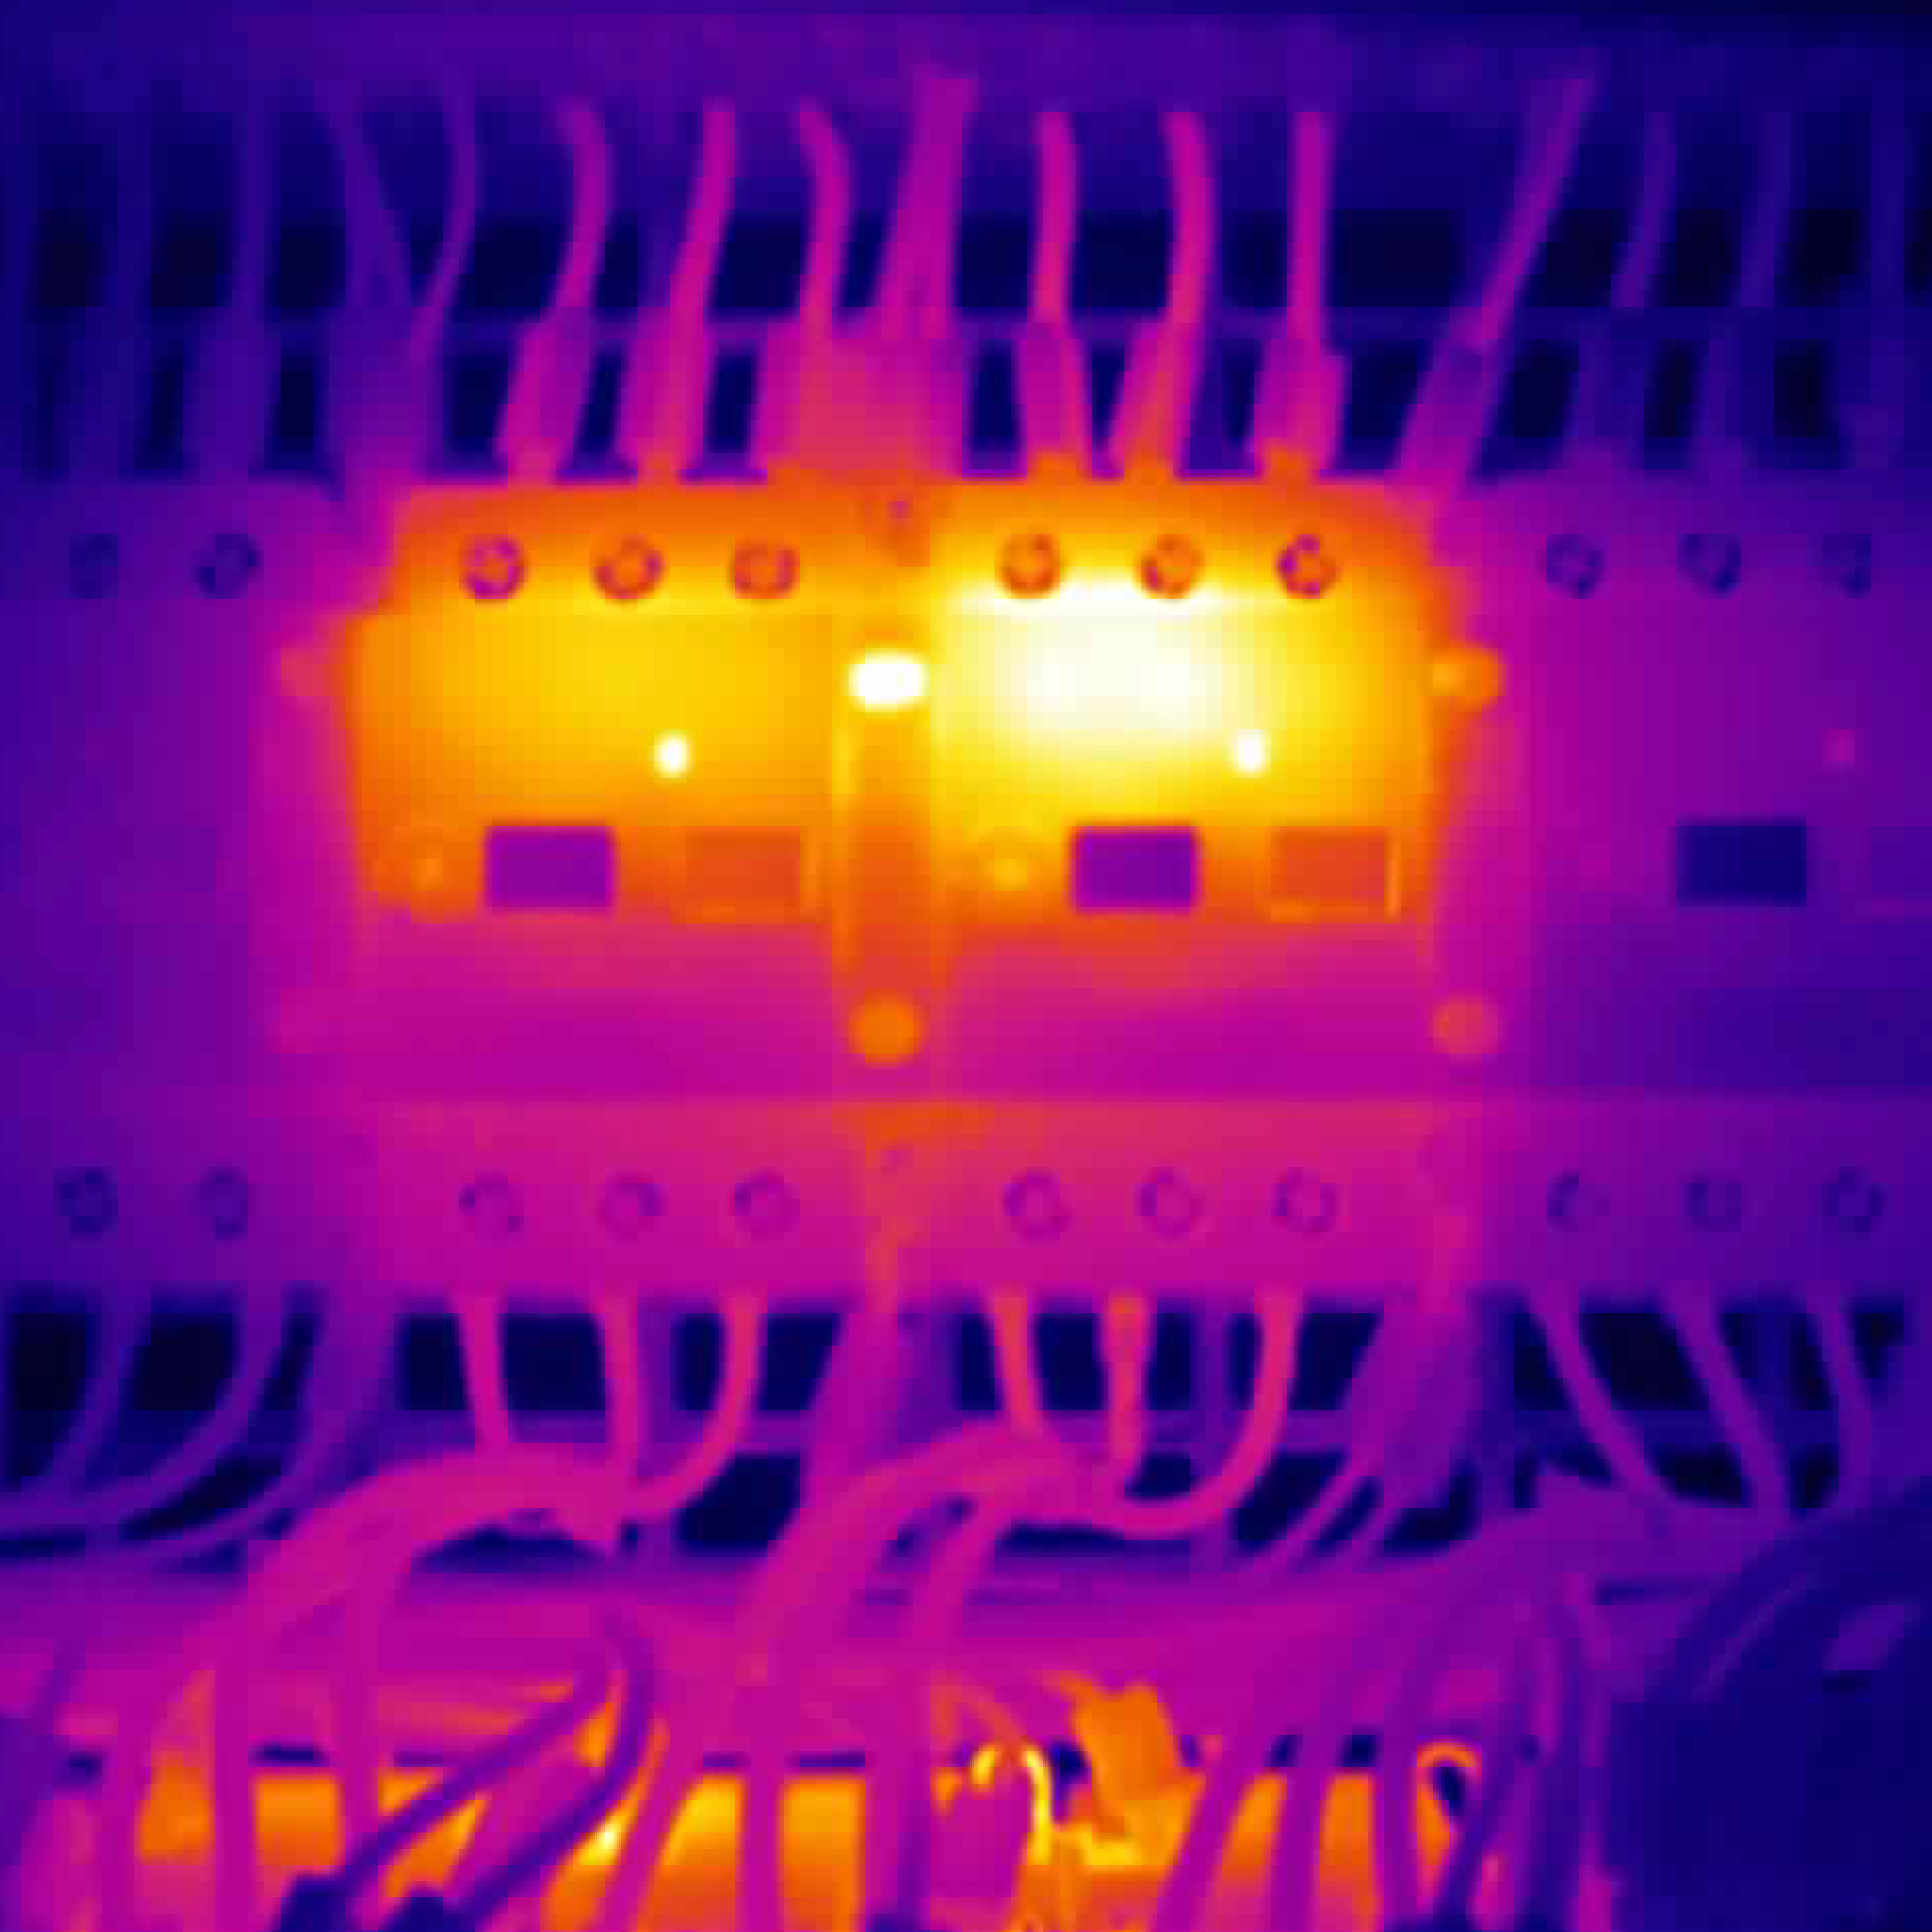 Thermal imaging is a method of improving visibility-